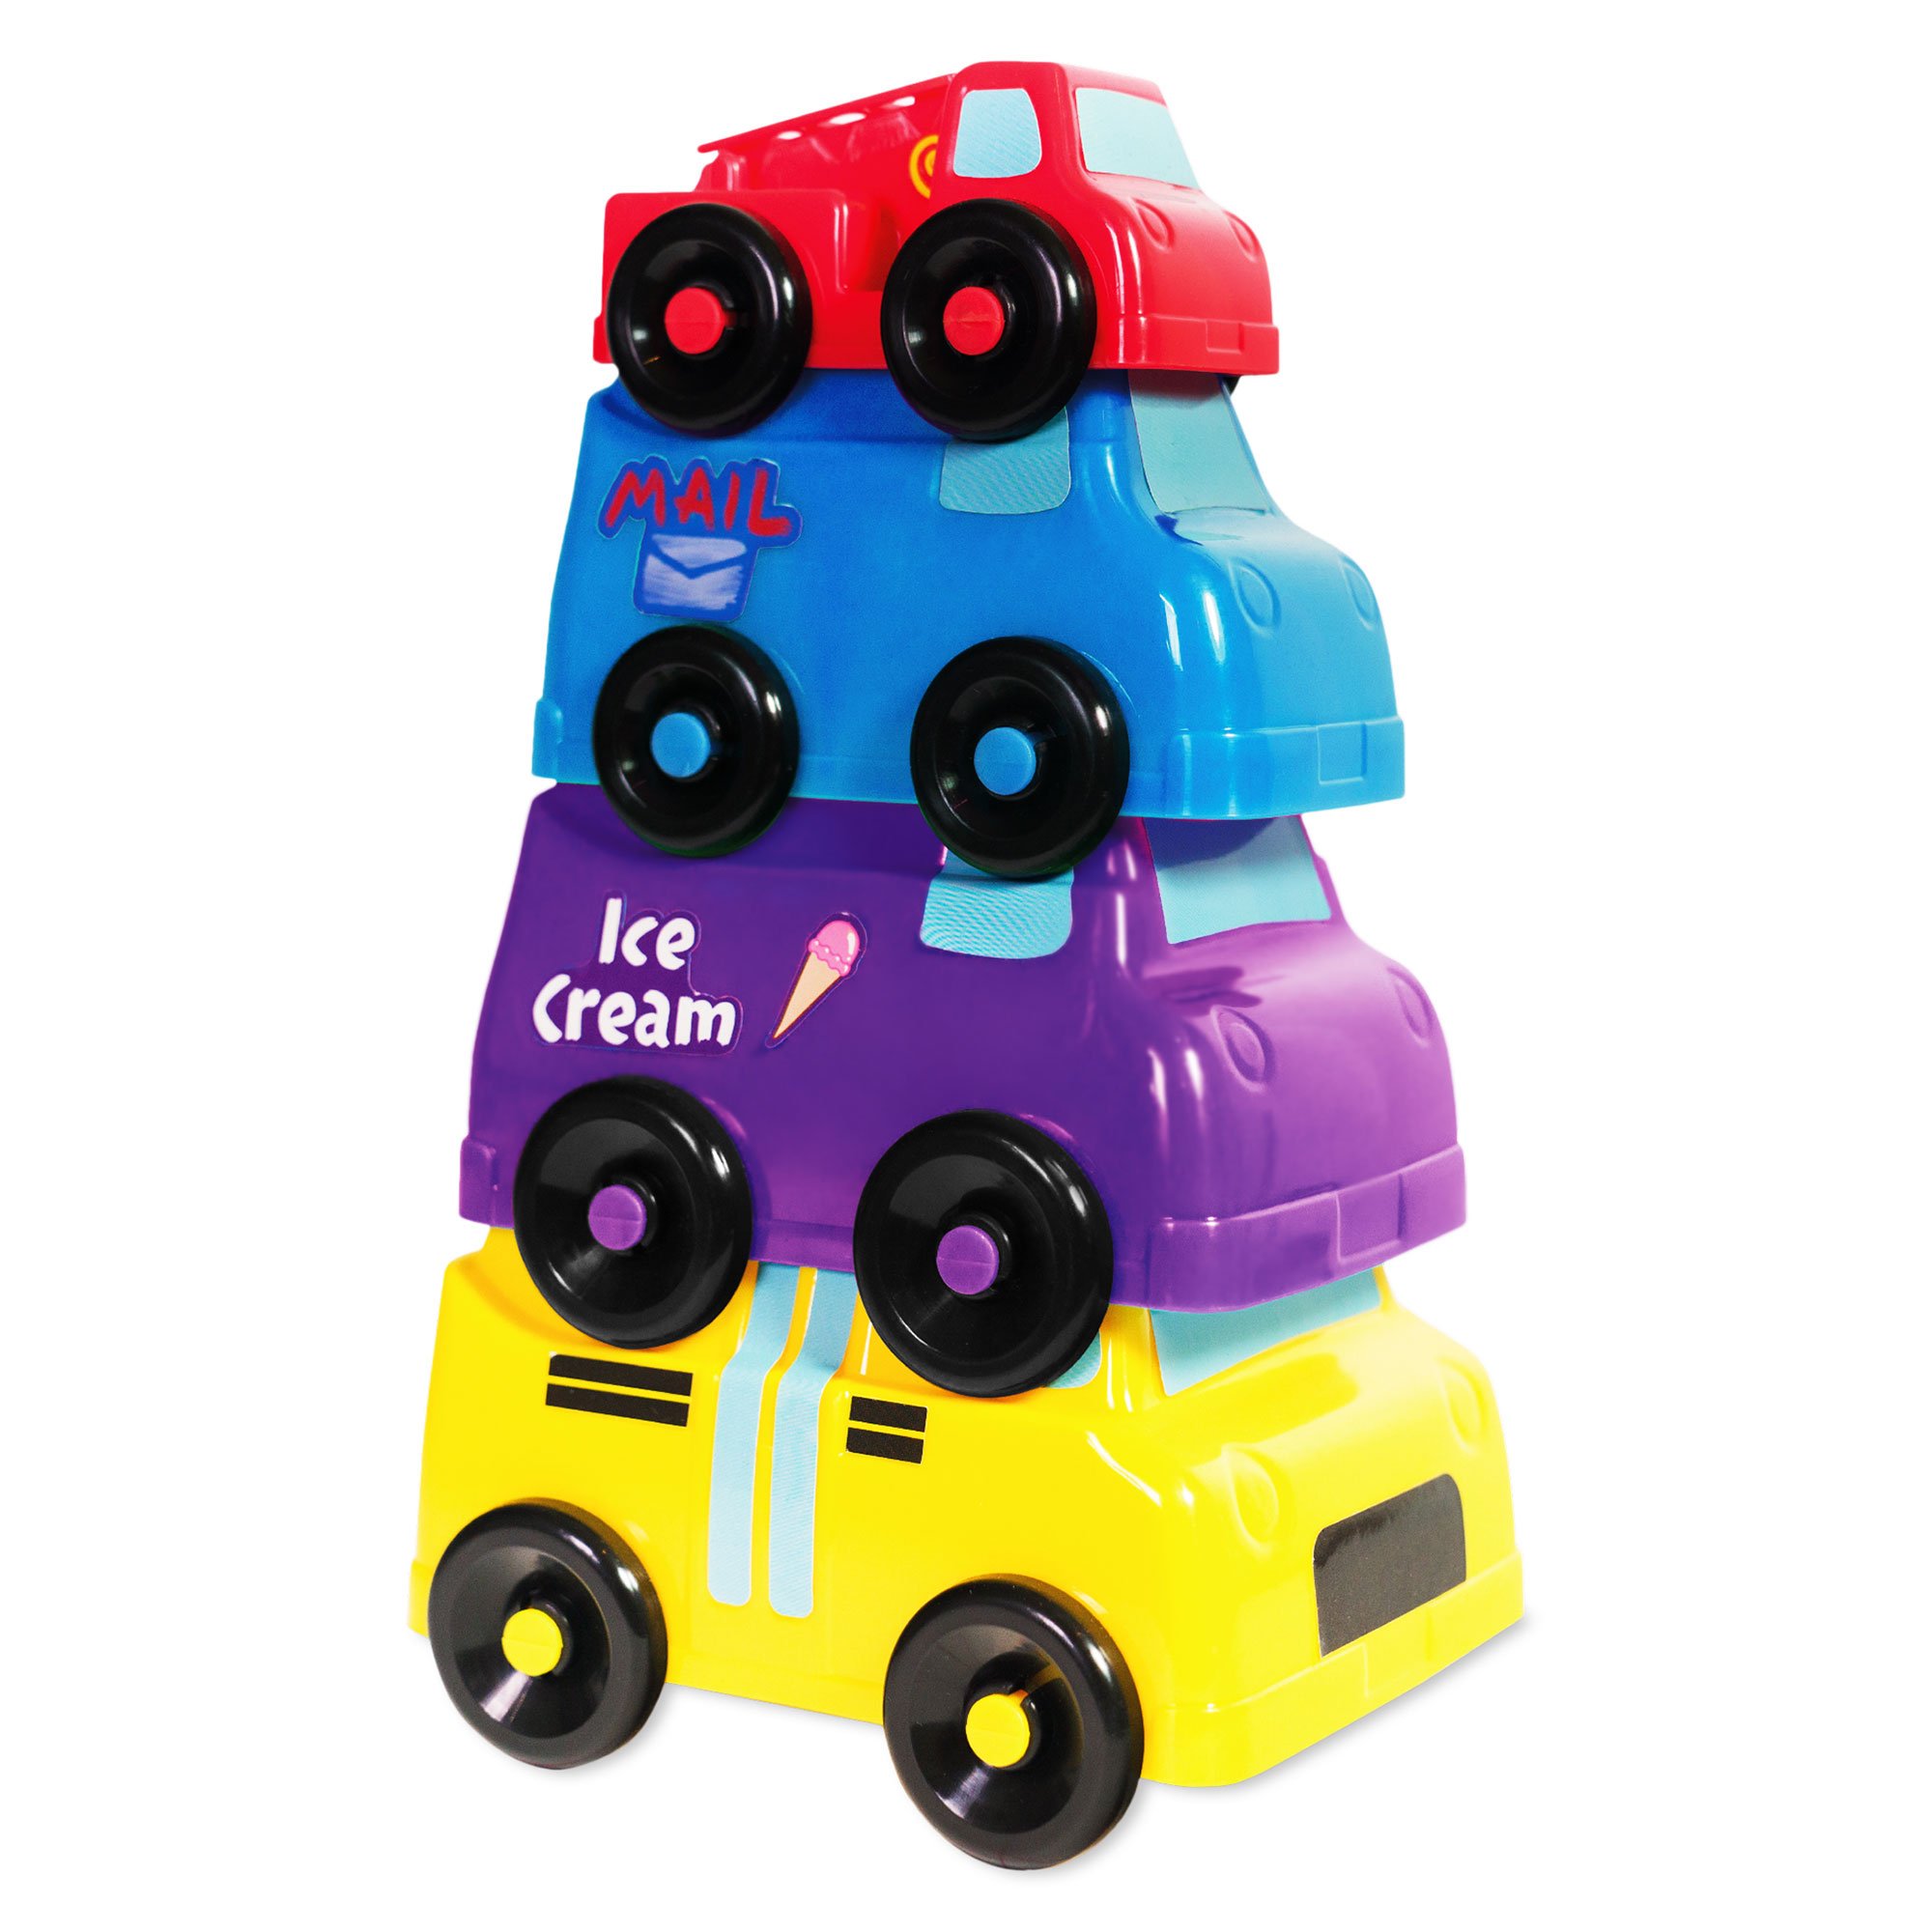 CoComelon Fun Stacking Vehicles 